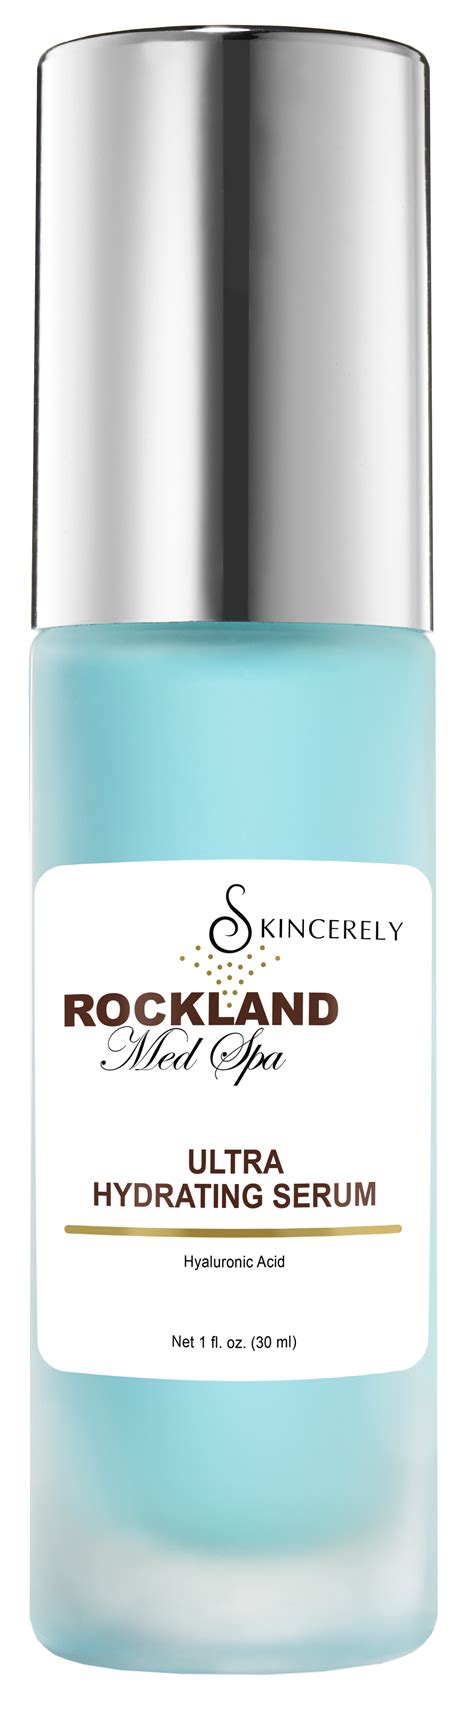 products rockland med spa